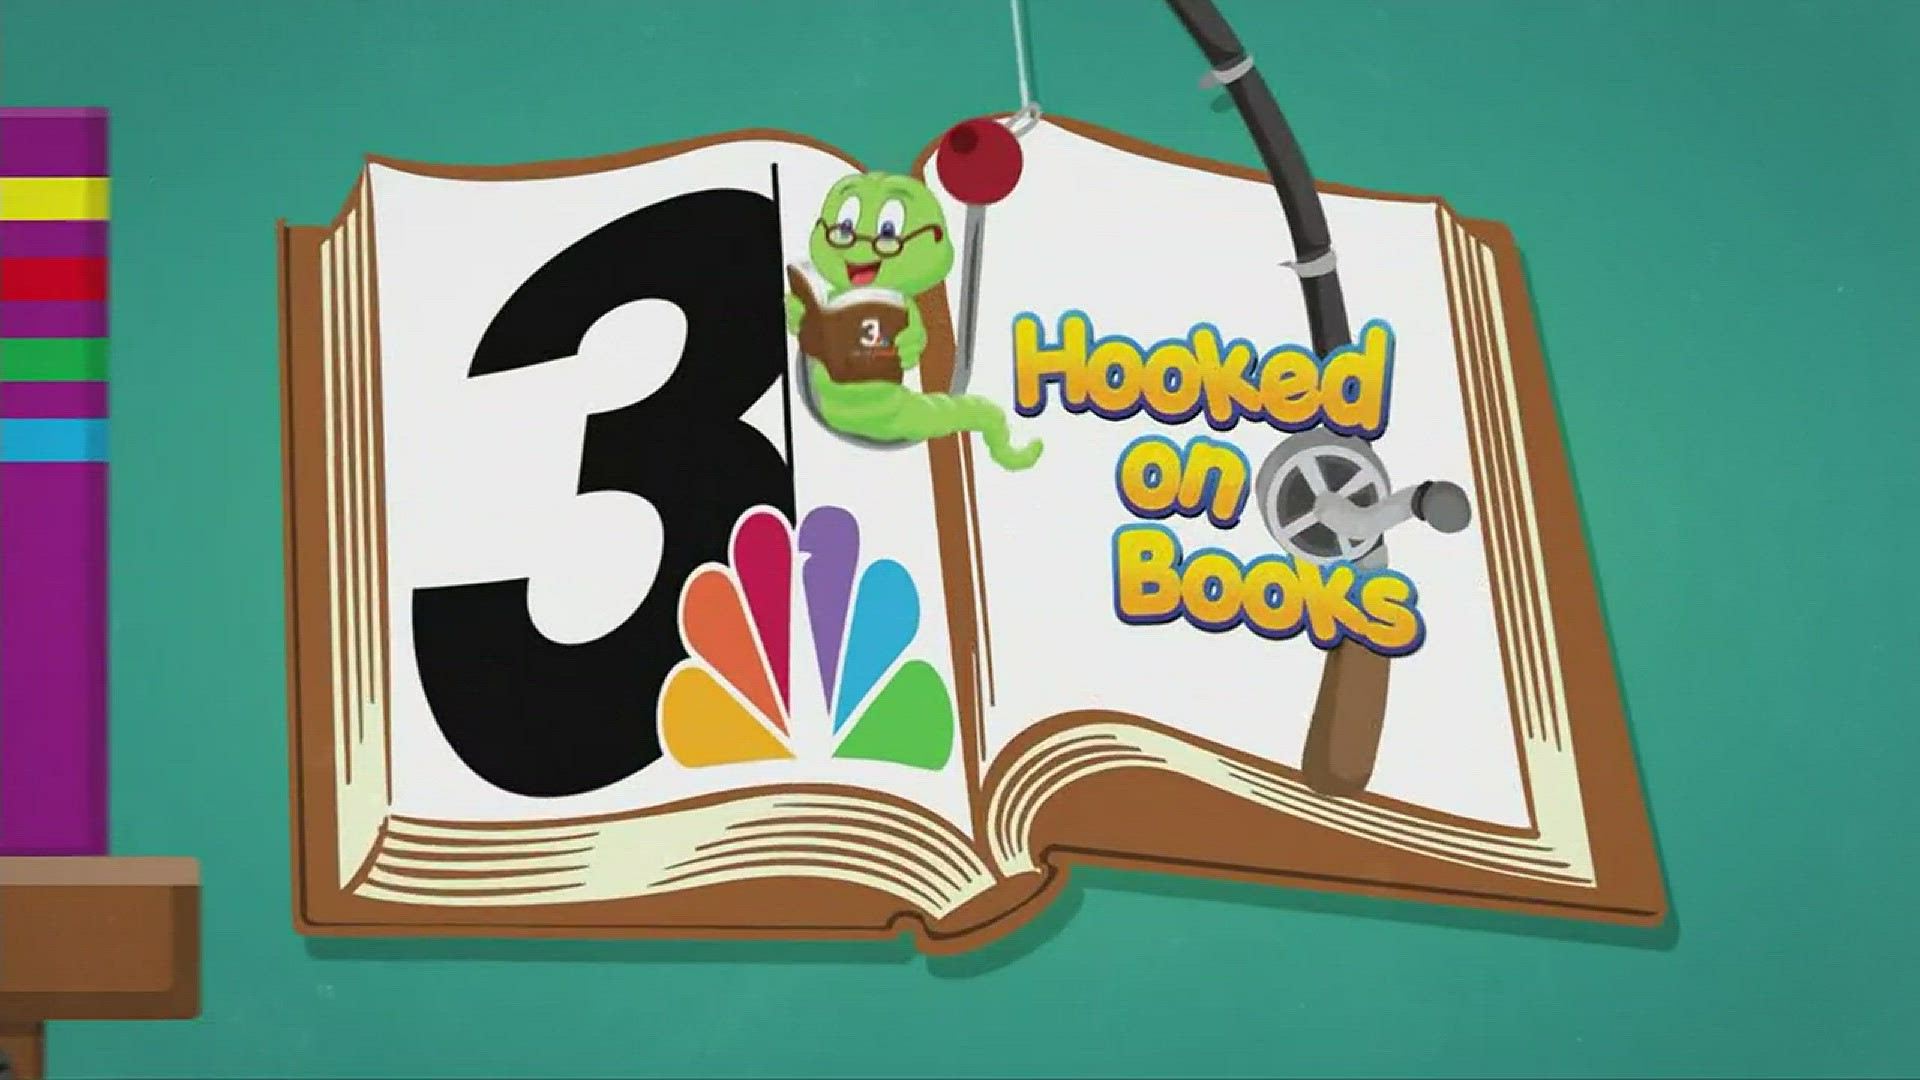 Nominate your school or classroom to win free books, WKYC freebie, and a visit by one of our anchors and camera crew!